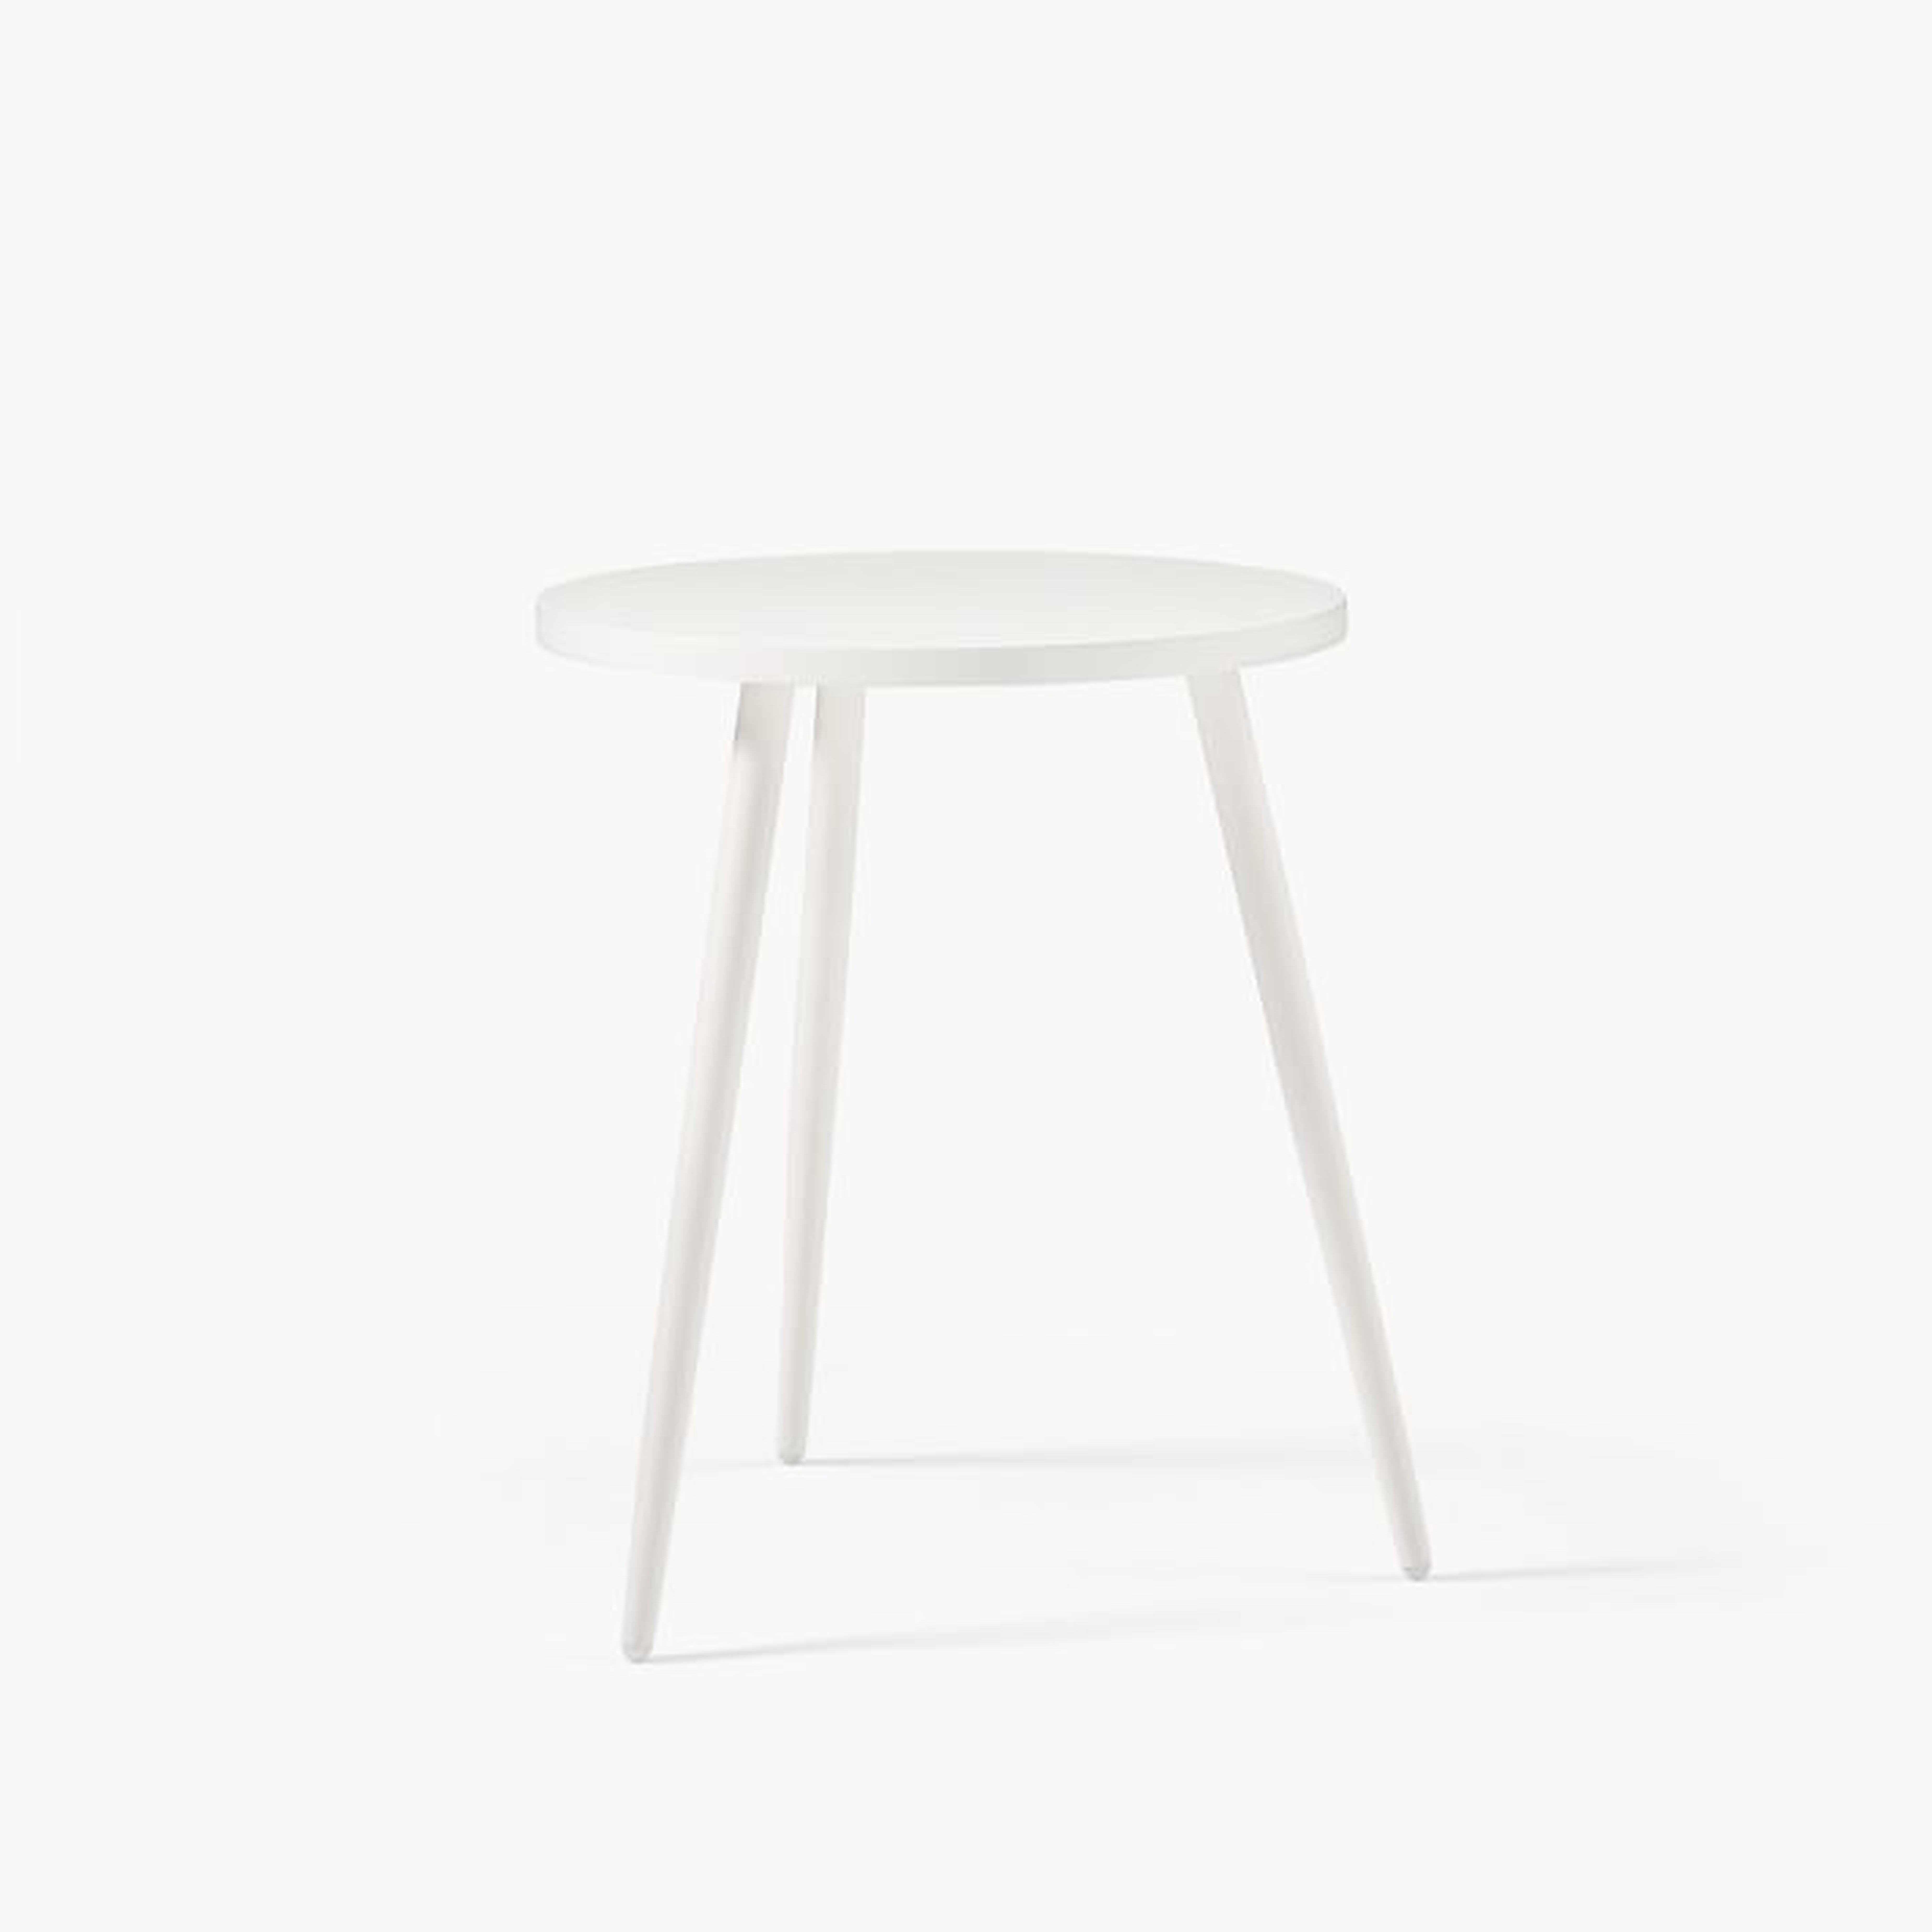 Mitzi Side Table, White - West Elm